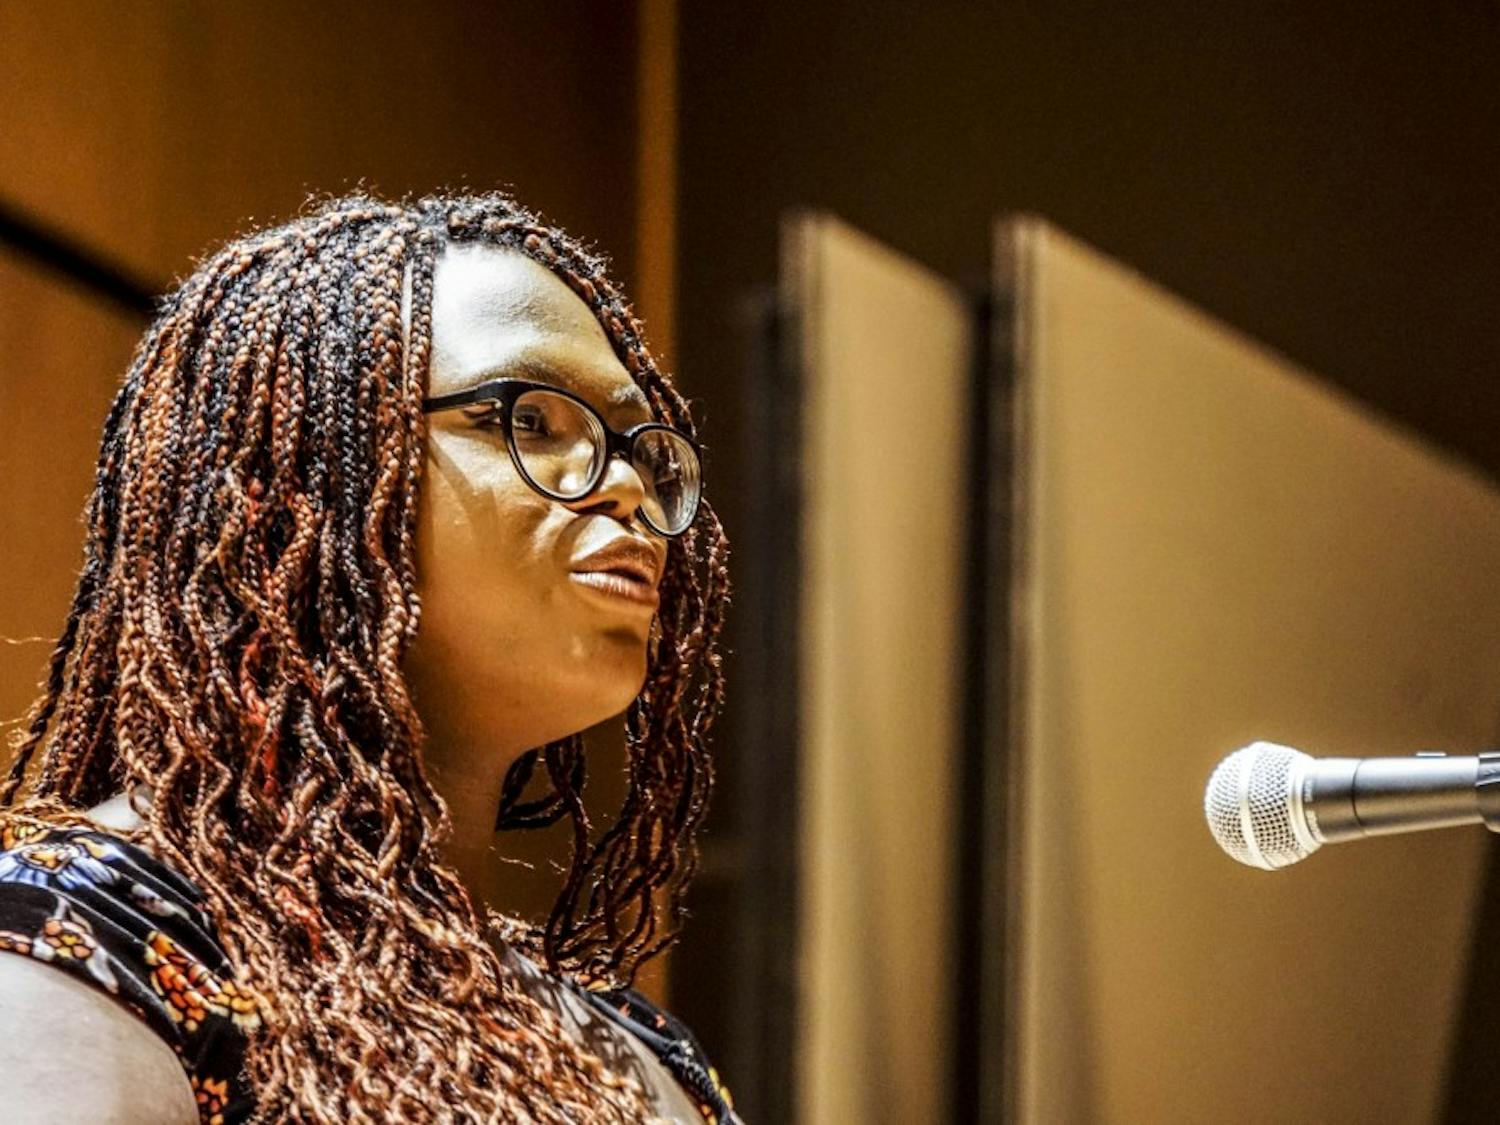 Kat Blaque speaks in Keller Hall on Oct. 24, 2017 about her struggles through life as a transgender woman. 
